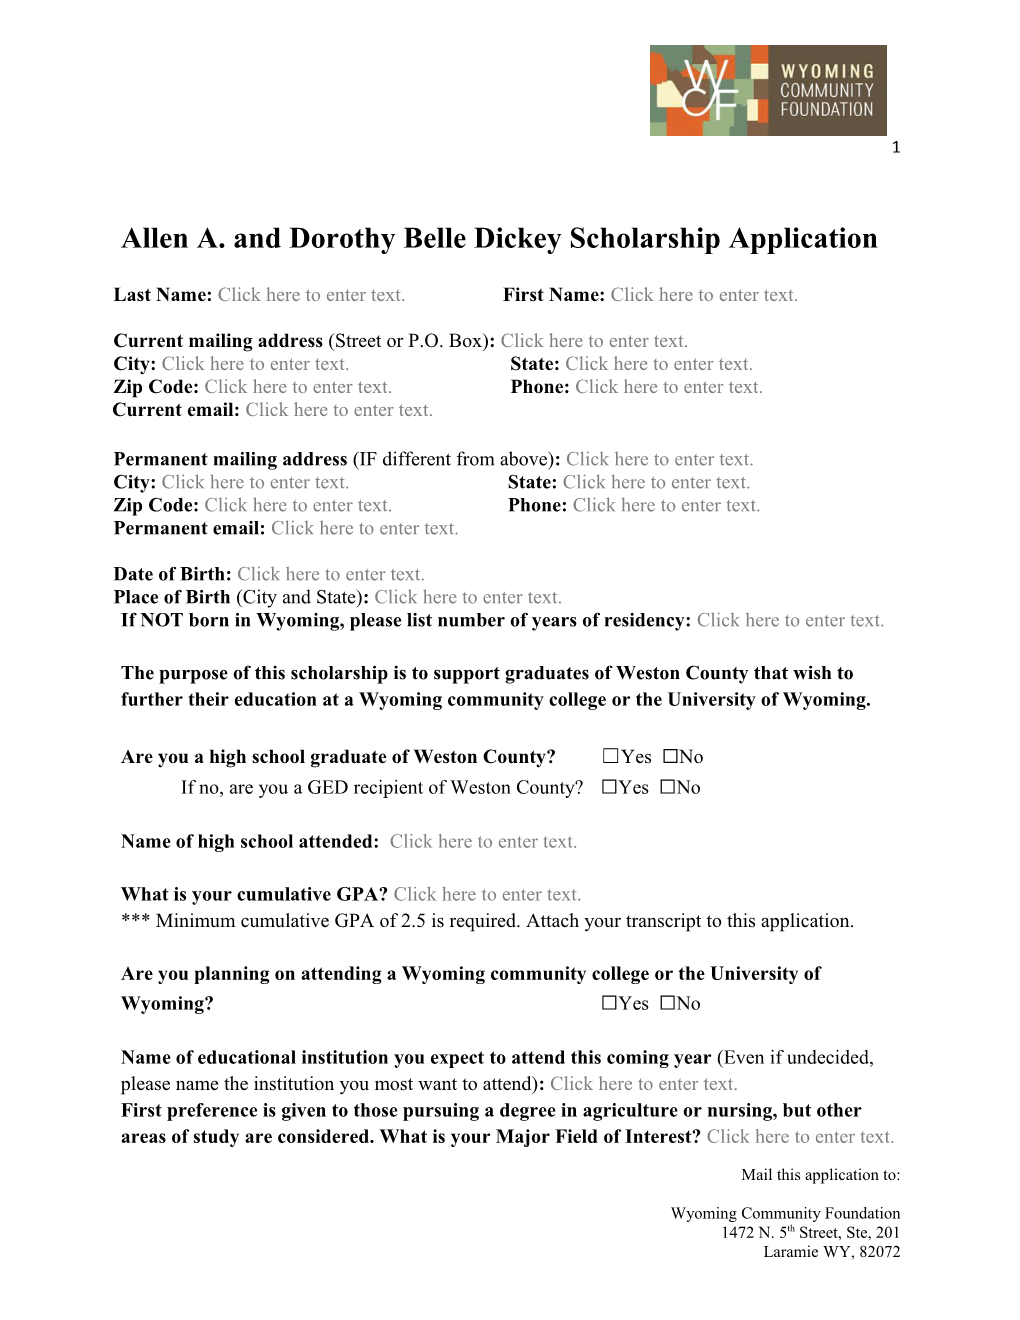 Allen A. and Dorothy Belle Dickeyscholarship Application